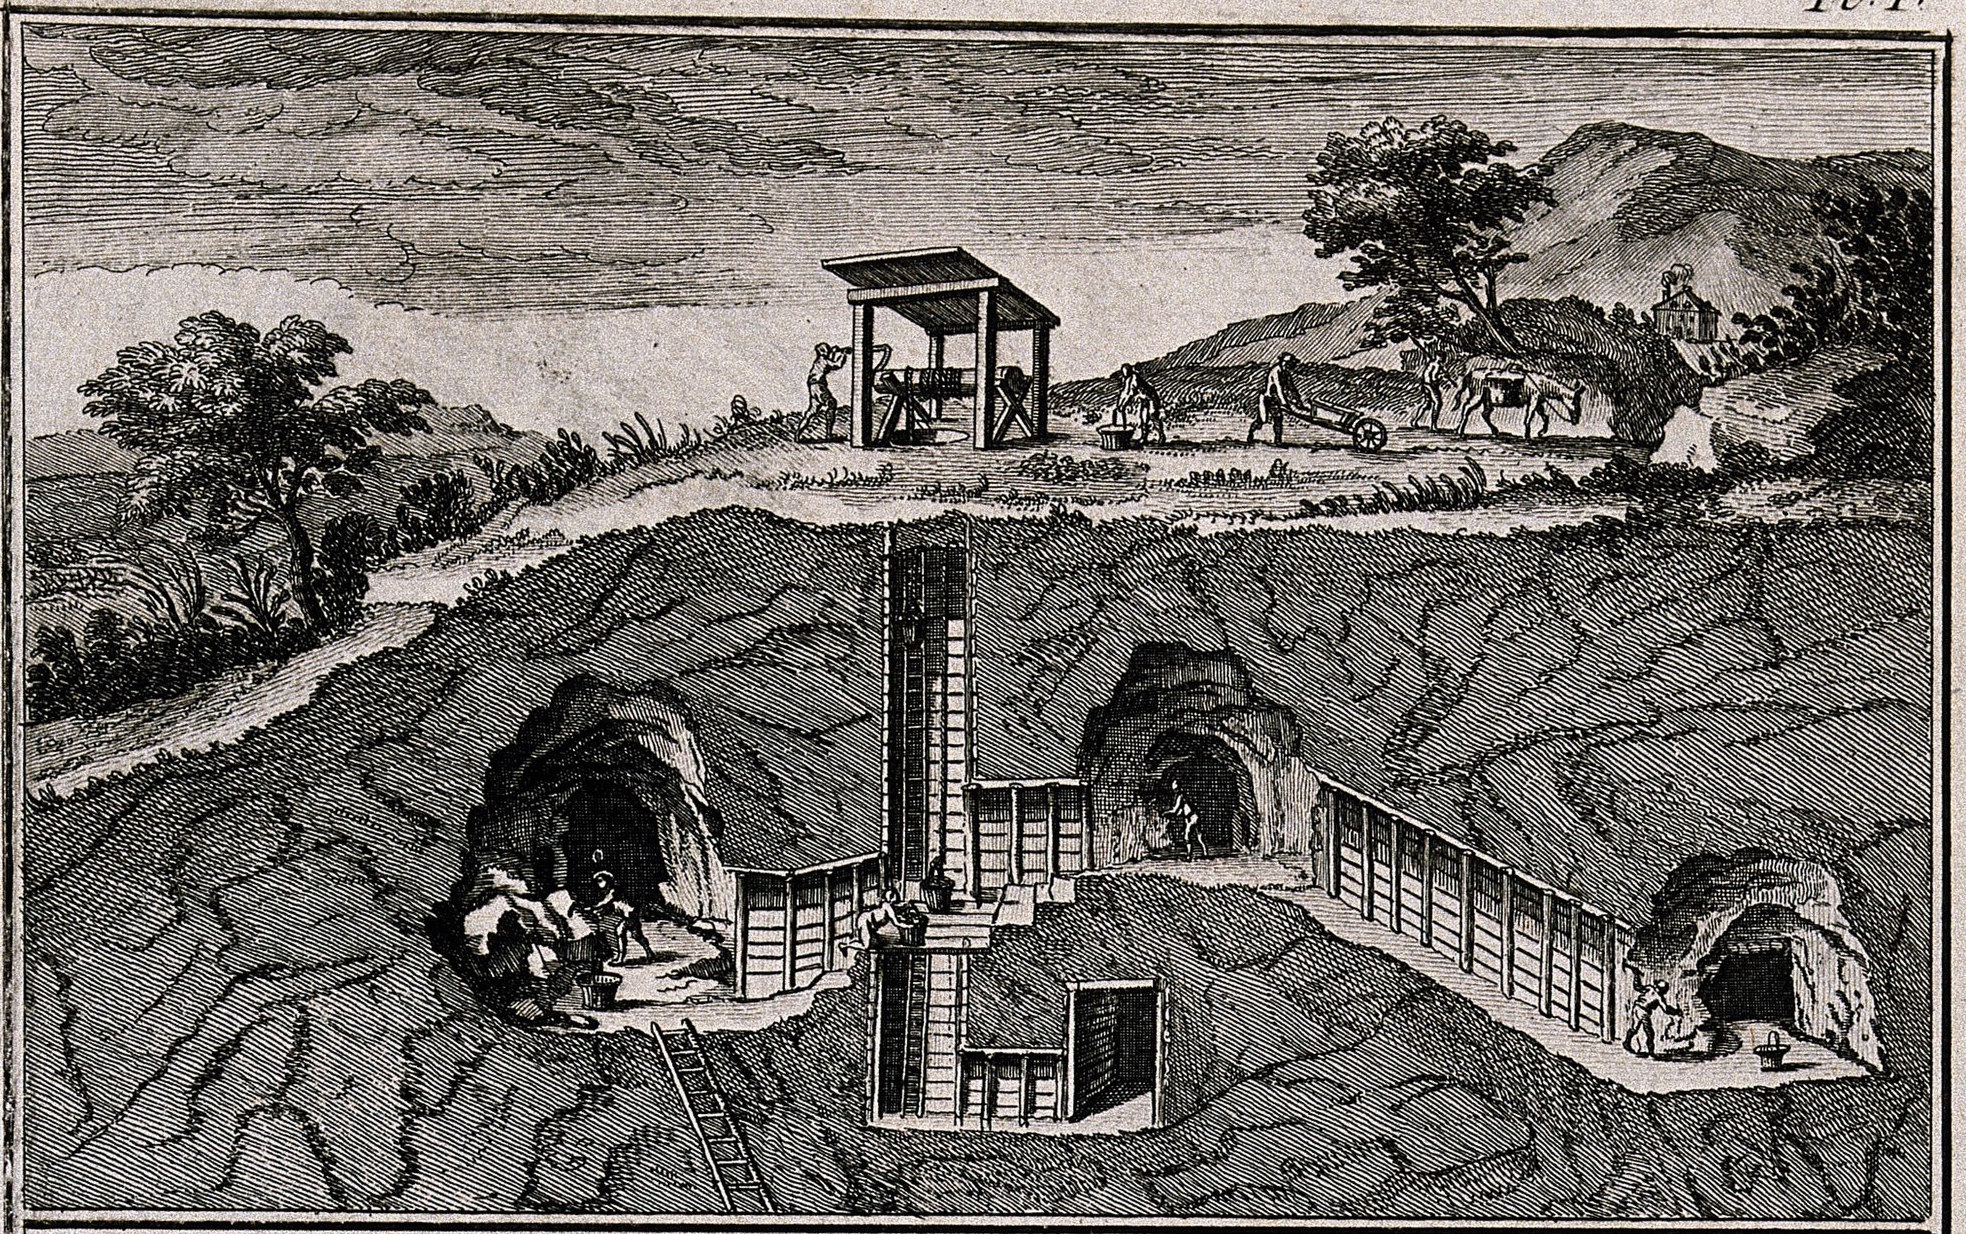 an image showing miners digging underground